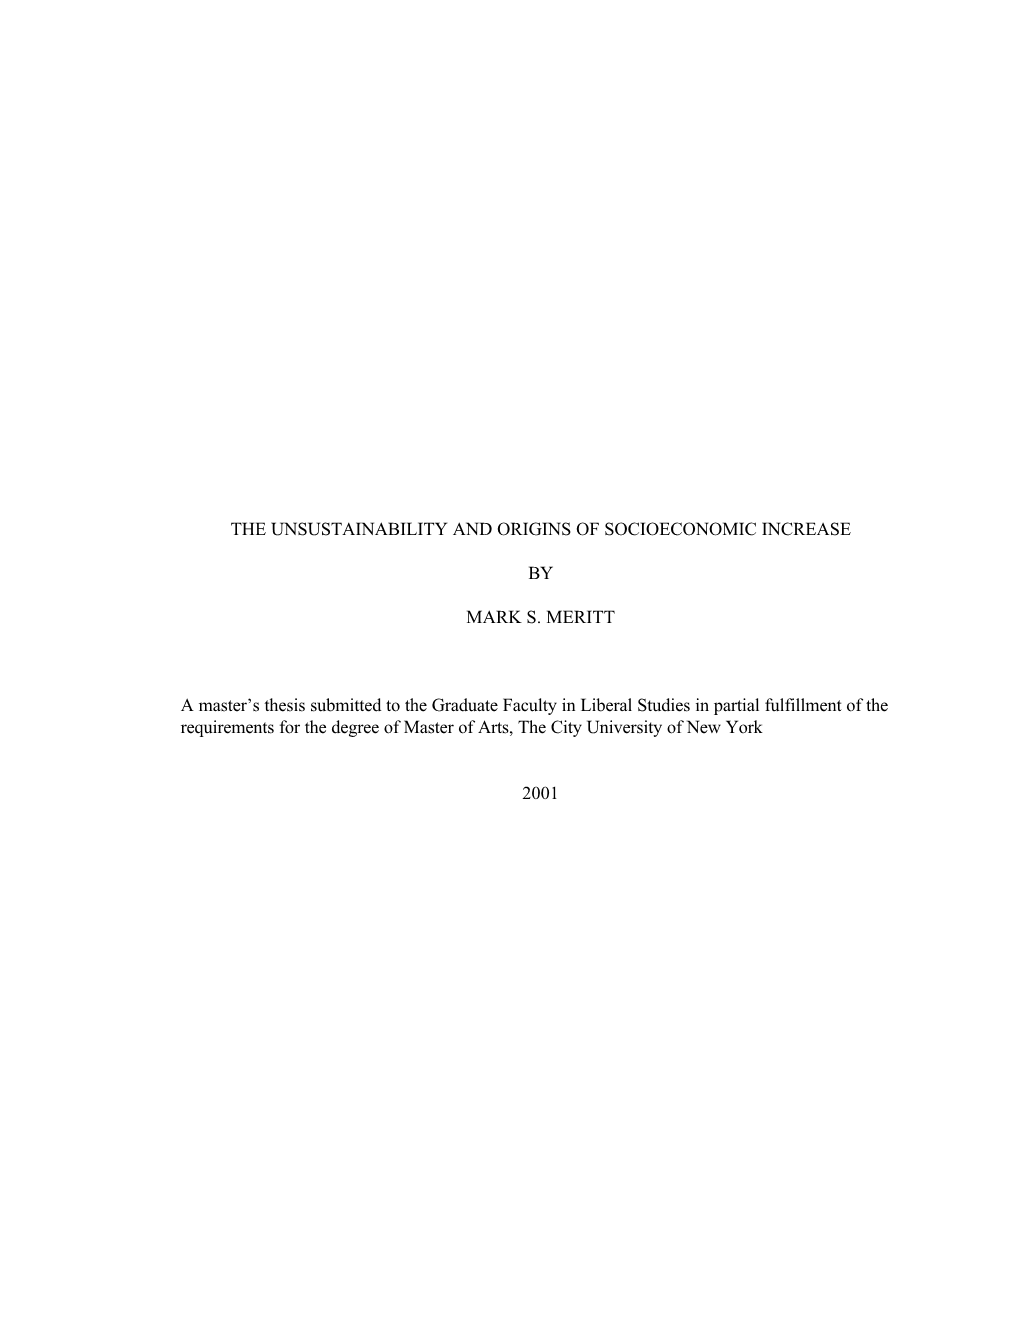 THE UNSUSTAINABILITY and ORIGINS of SOCIOECONOMIC INCREASE by MARK S. MERITT a Master's Thesis Submitted to the Graduate Facul